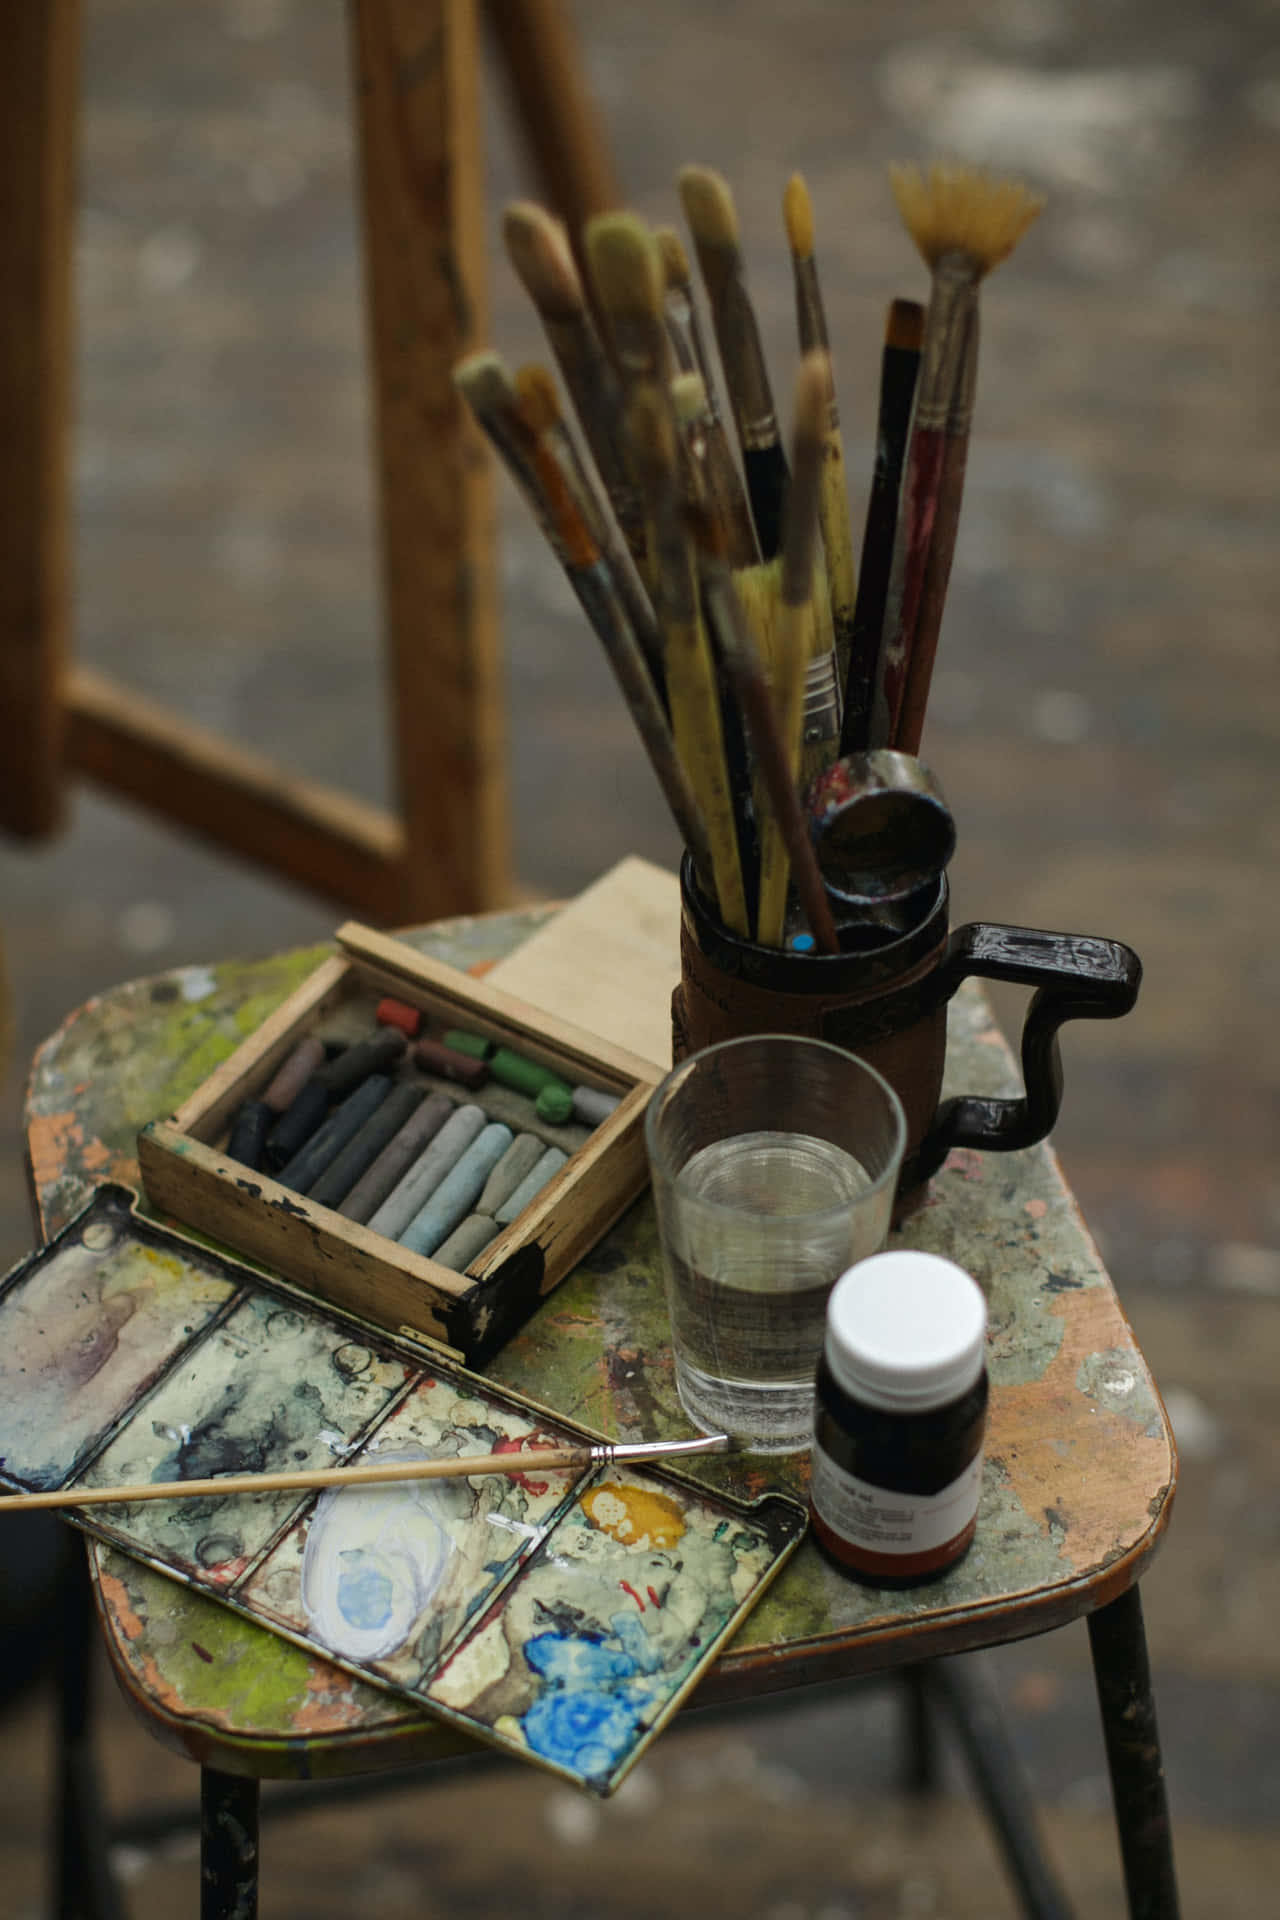 Get creative with this paint brush and unleash your inner artist